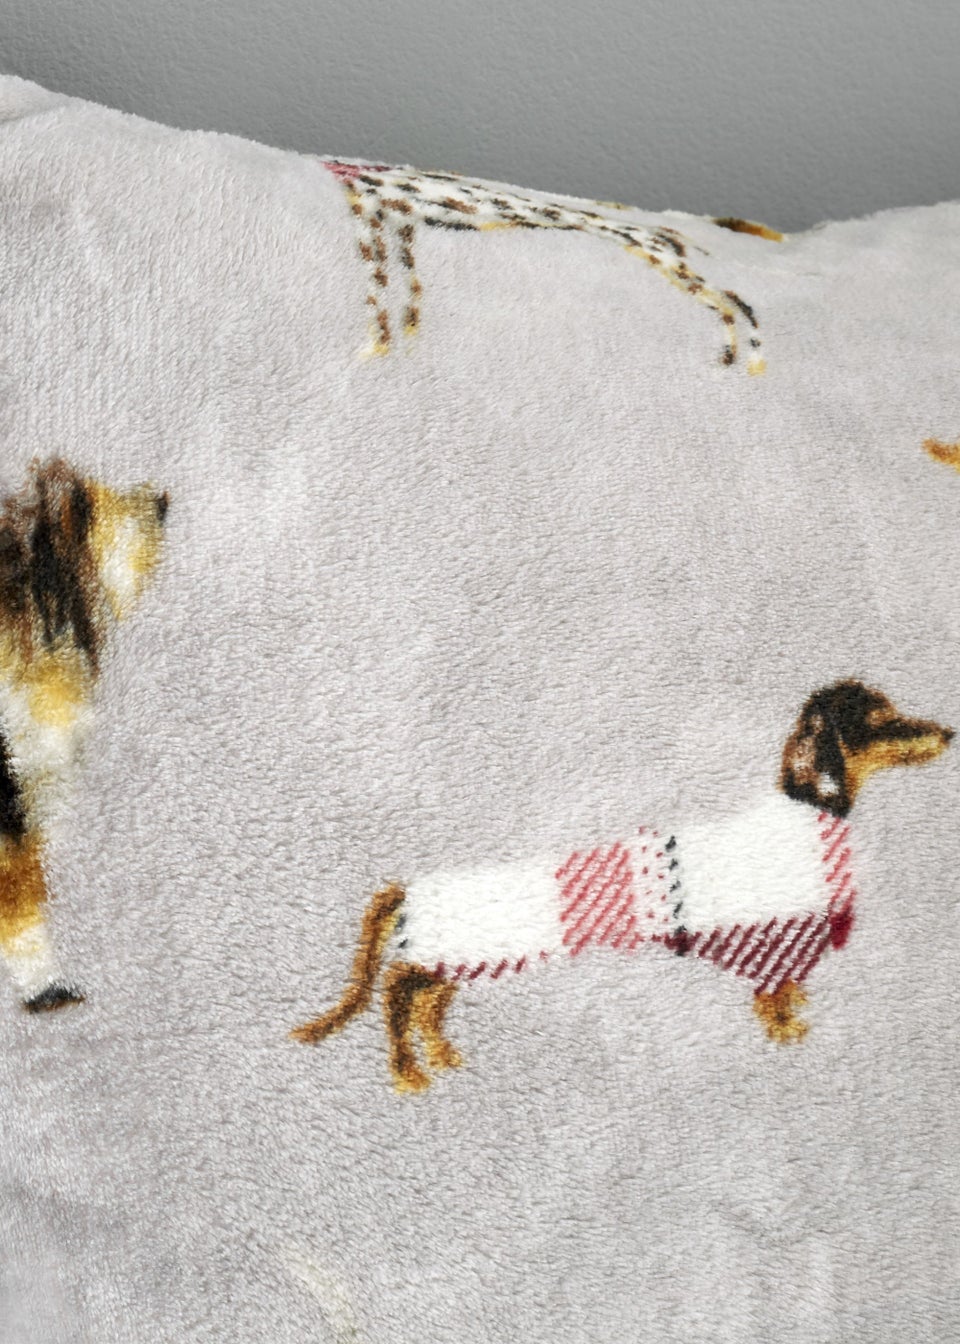 Catherine Lansfield Country Dogs Cushion